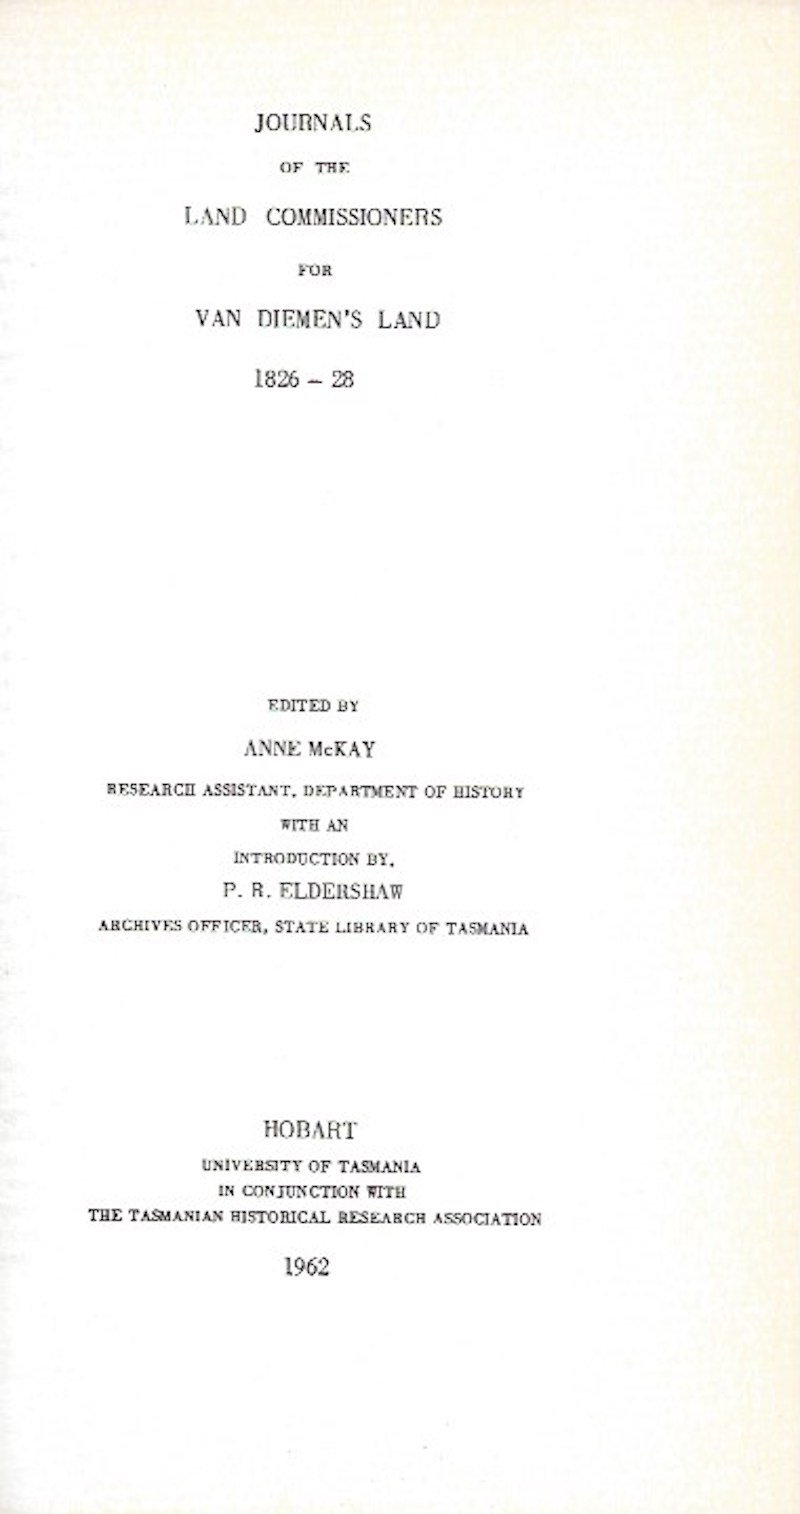 Journals of the Land Commissioners for Van Diemen's Land 1826-1828 by McKay, Anne edits